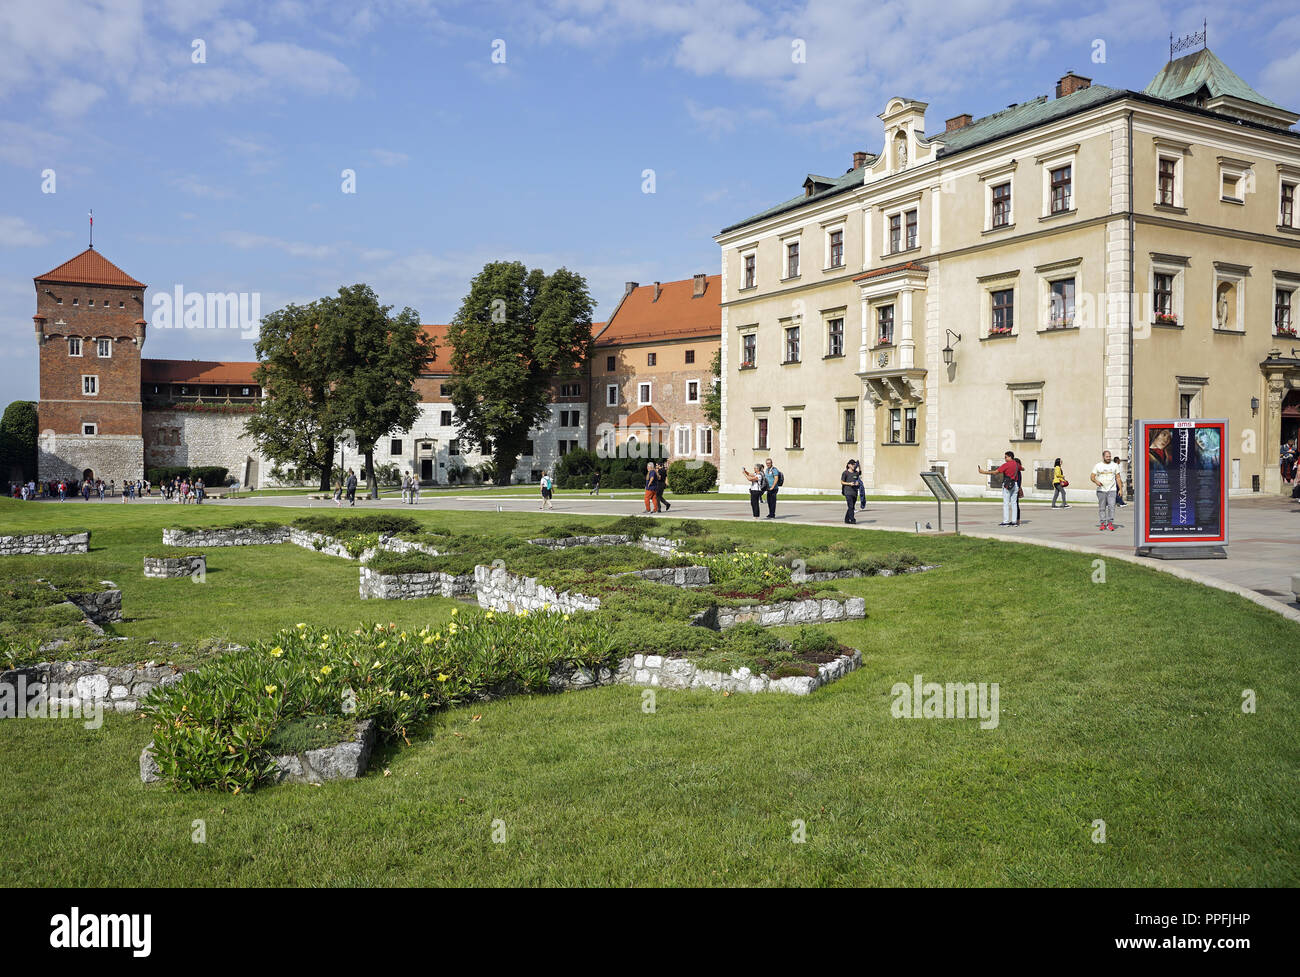 The rectory of the cathedral parish in Wawel. Stock Photo